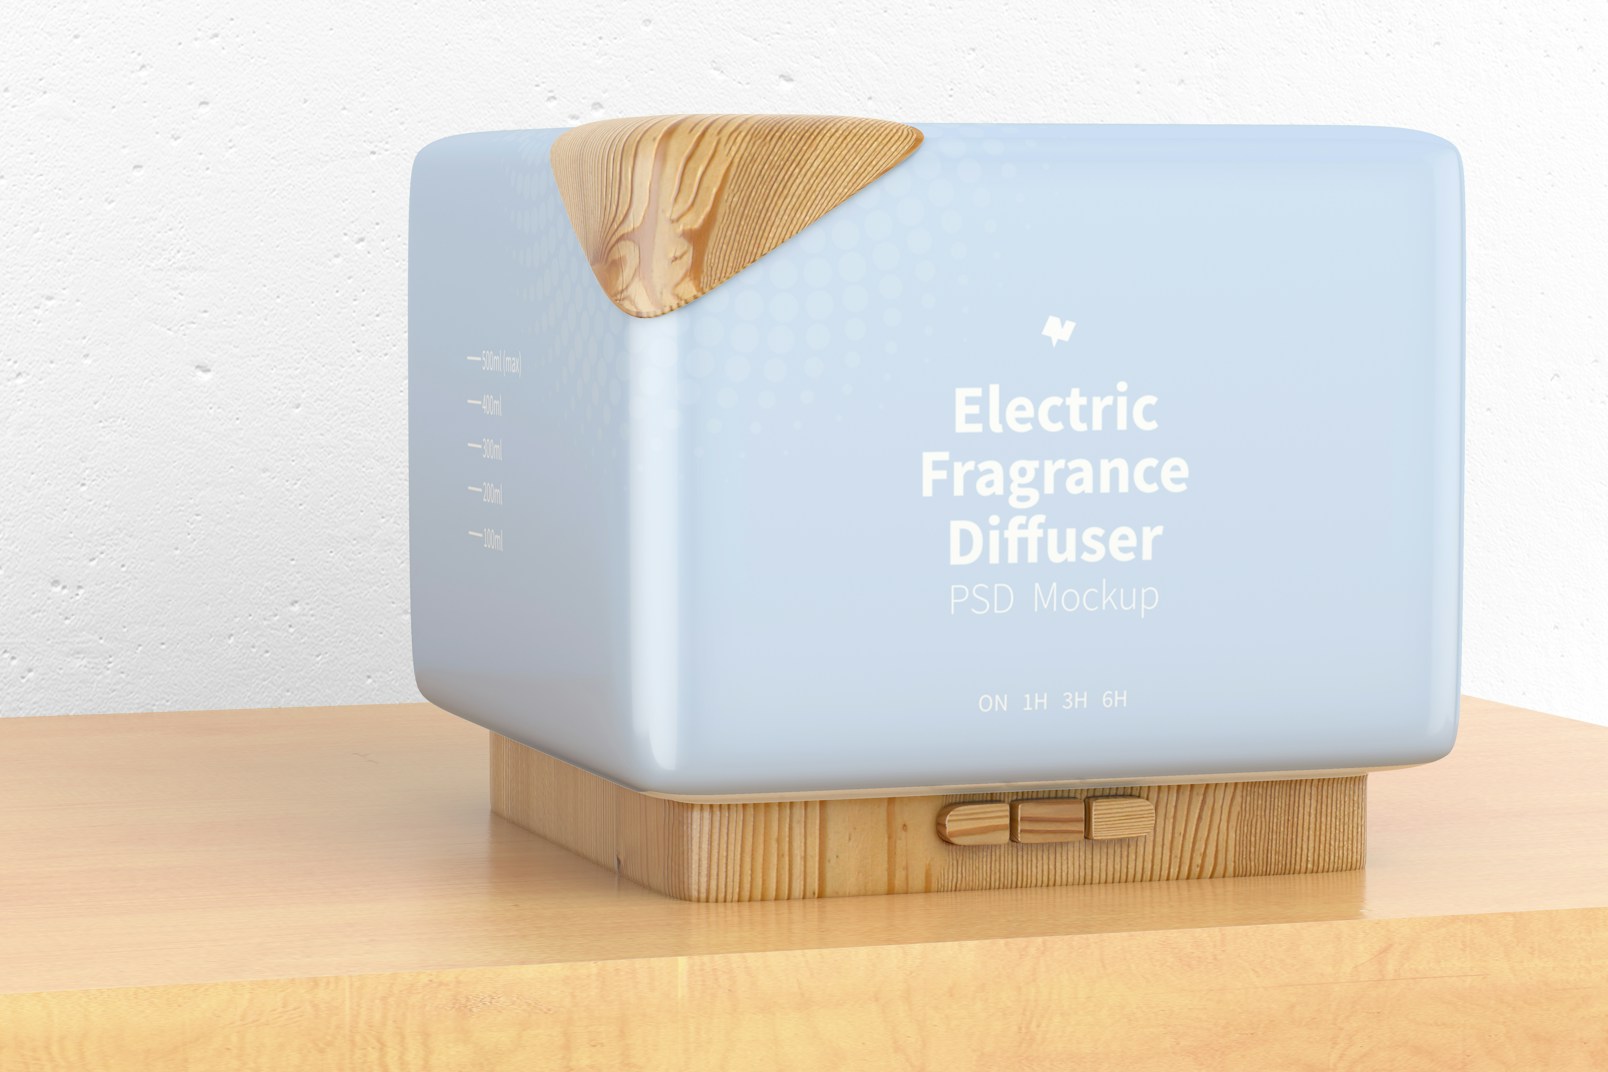 Electric Fragrance Diffuser Mockup, Right View